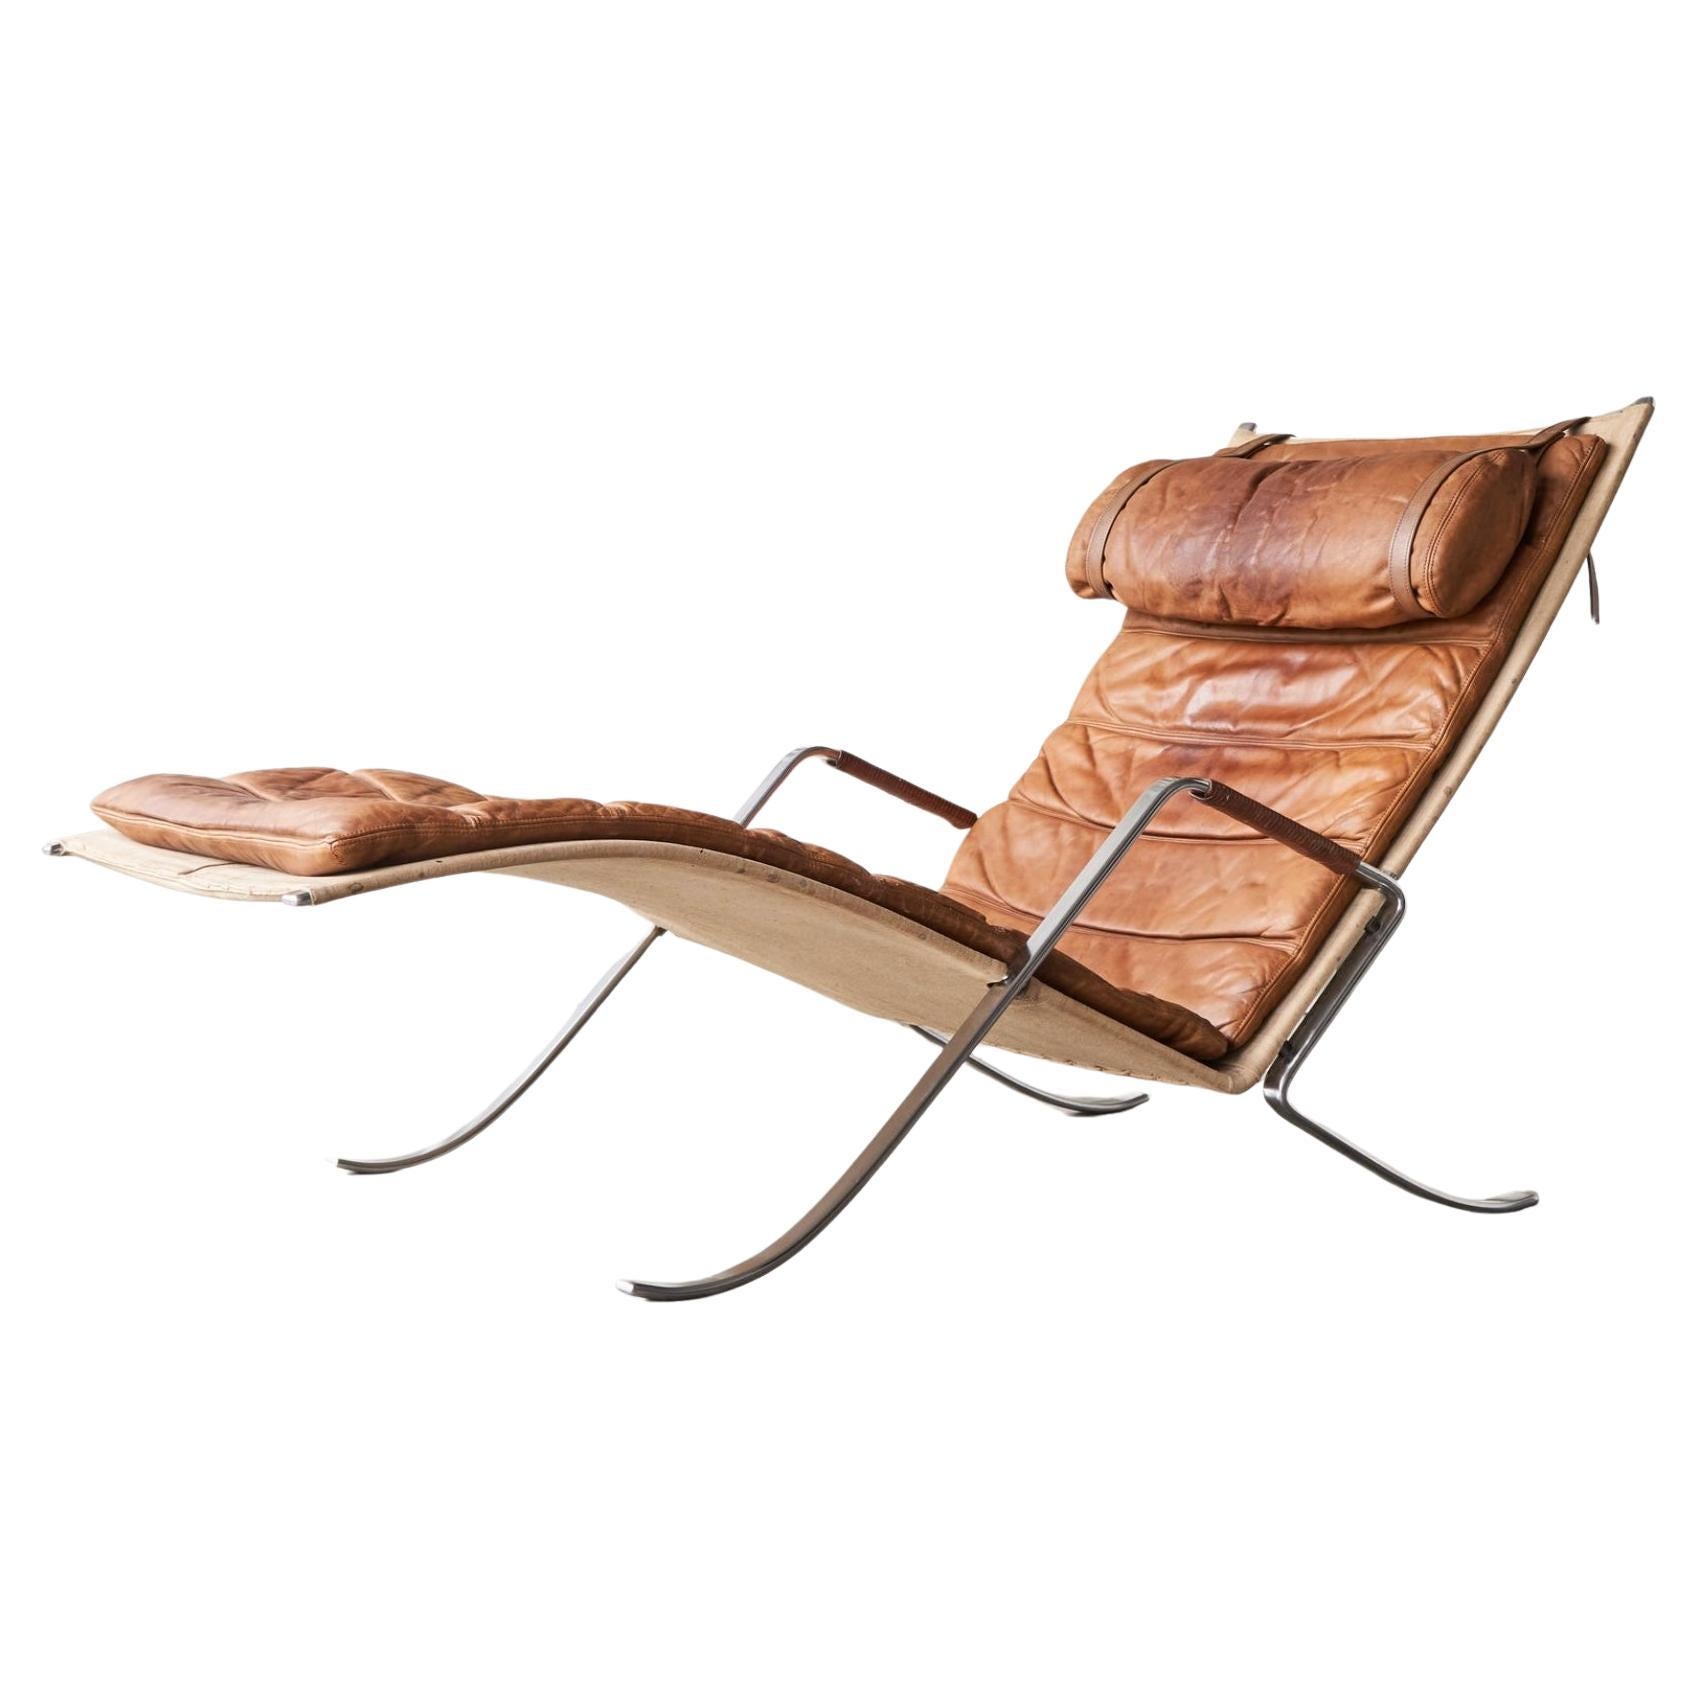 Fabricius & Kastholm FK87 Lounge Chair in Patinated Cognac Leather 1960s For Sale